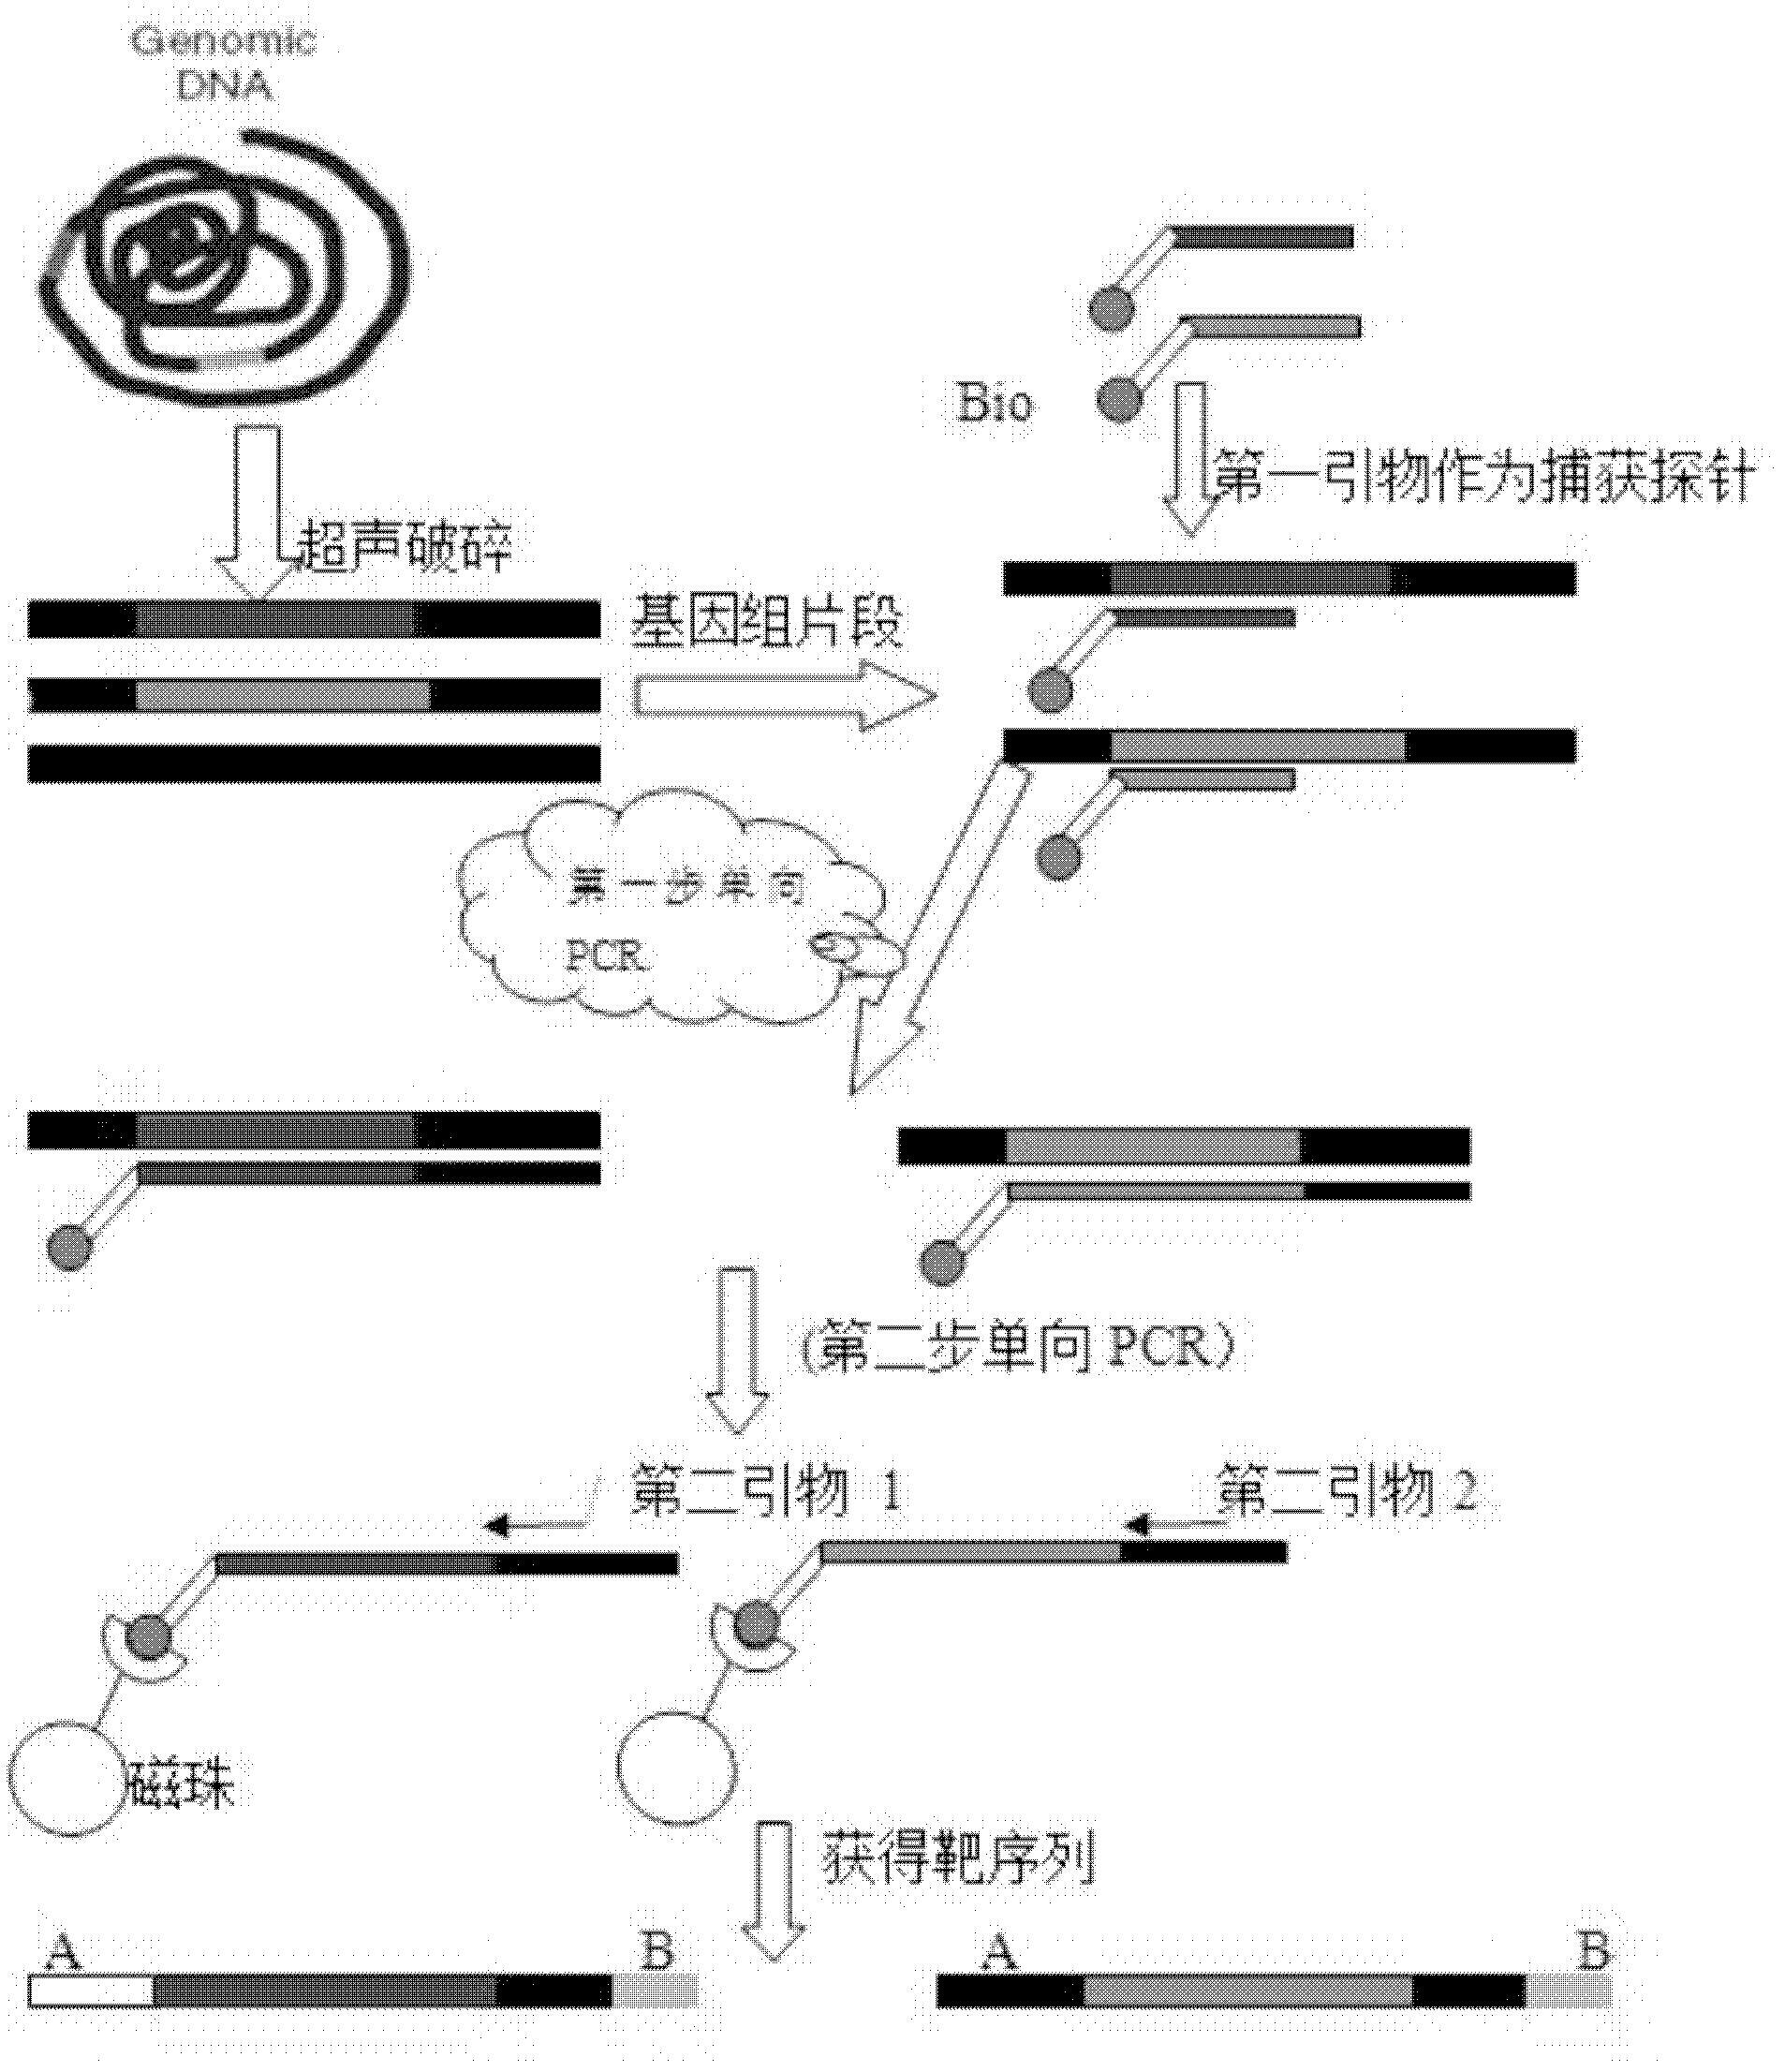 Method for qualitatively and quantitatively detecting nucleic acid based on high-flux sequencing technology